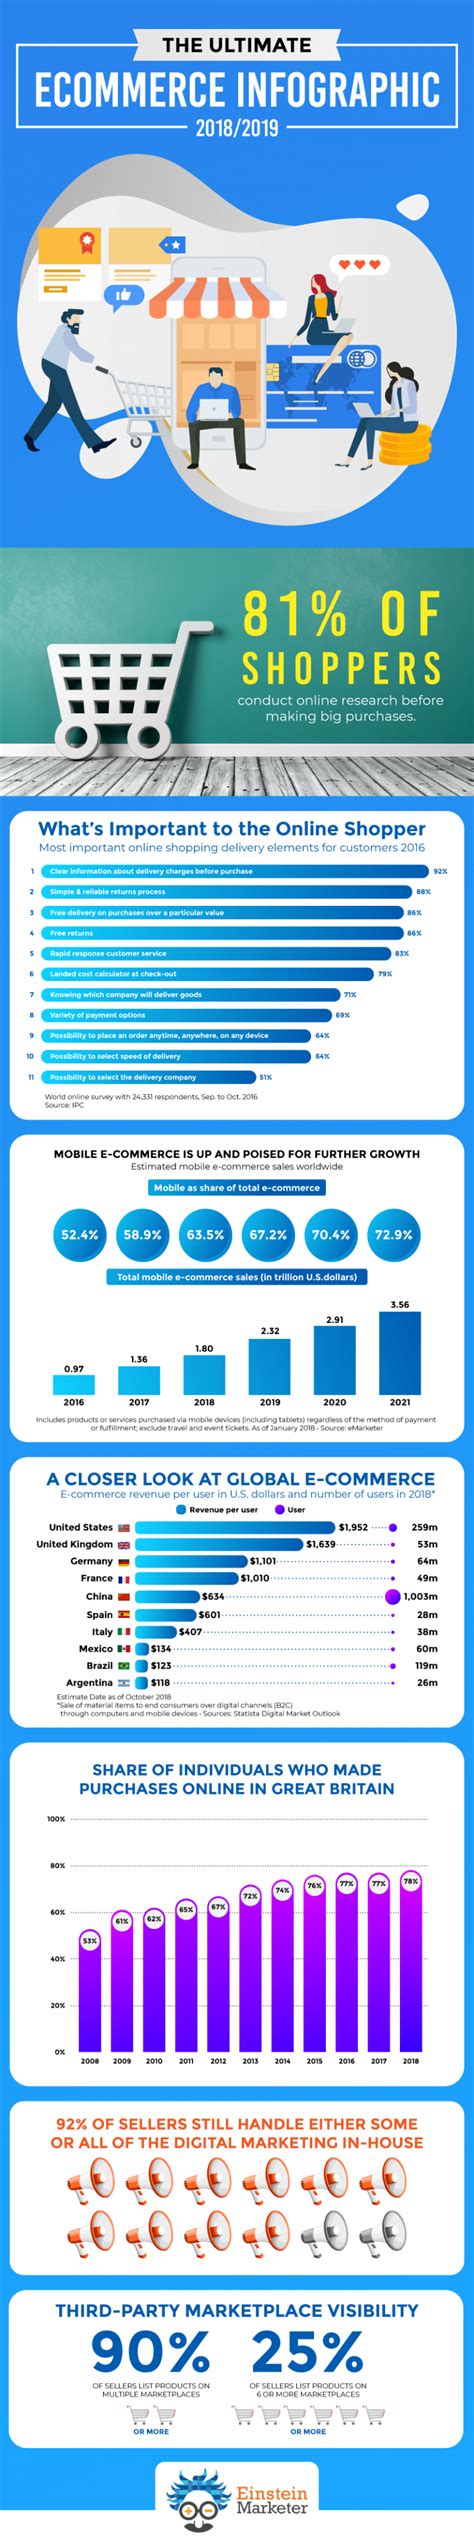 The Ultimate Ecommerce Infographic 2019 Einstein Marketer